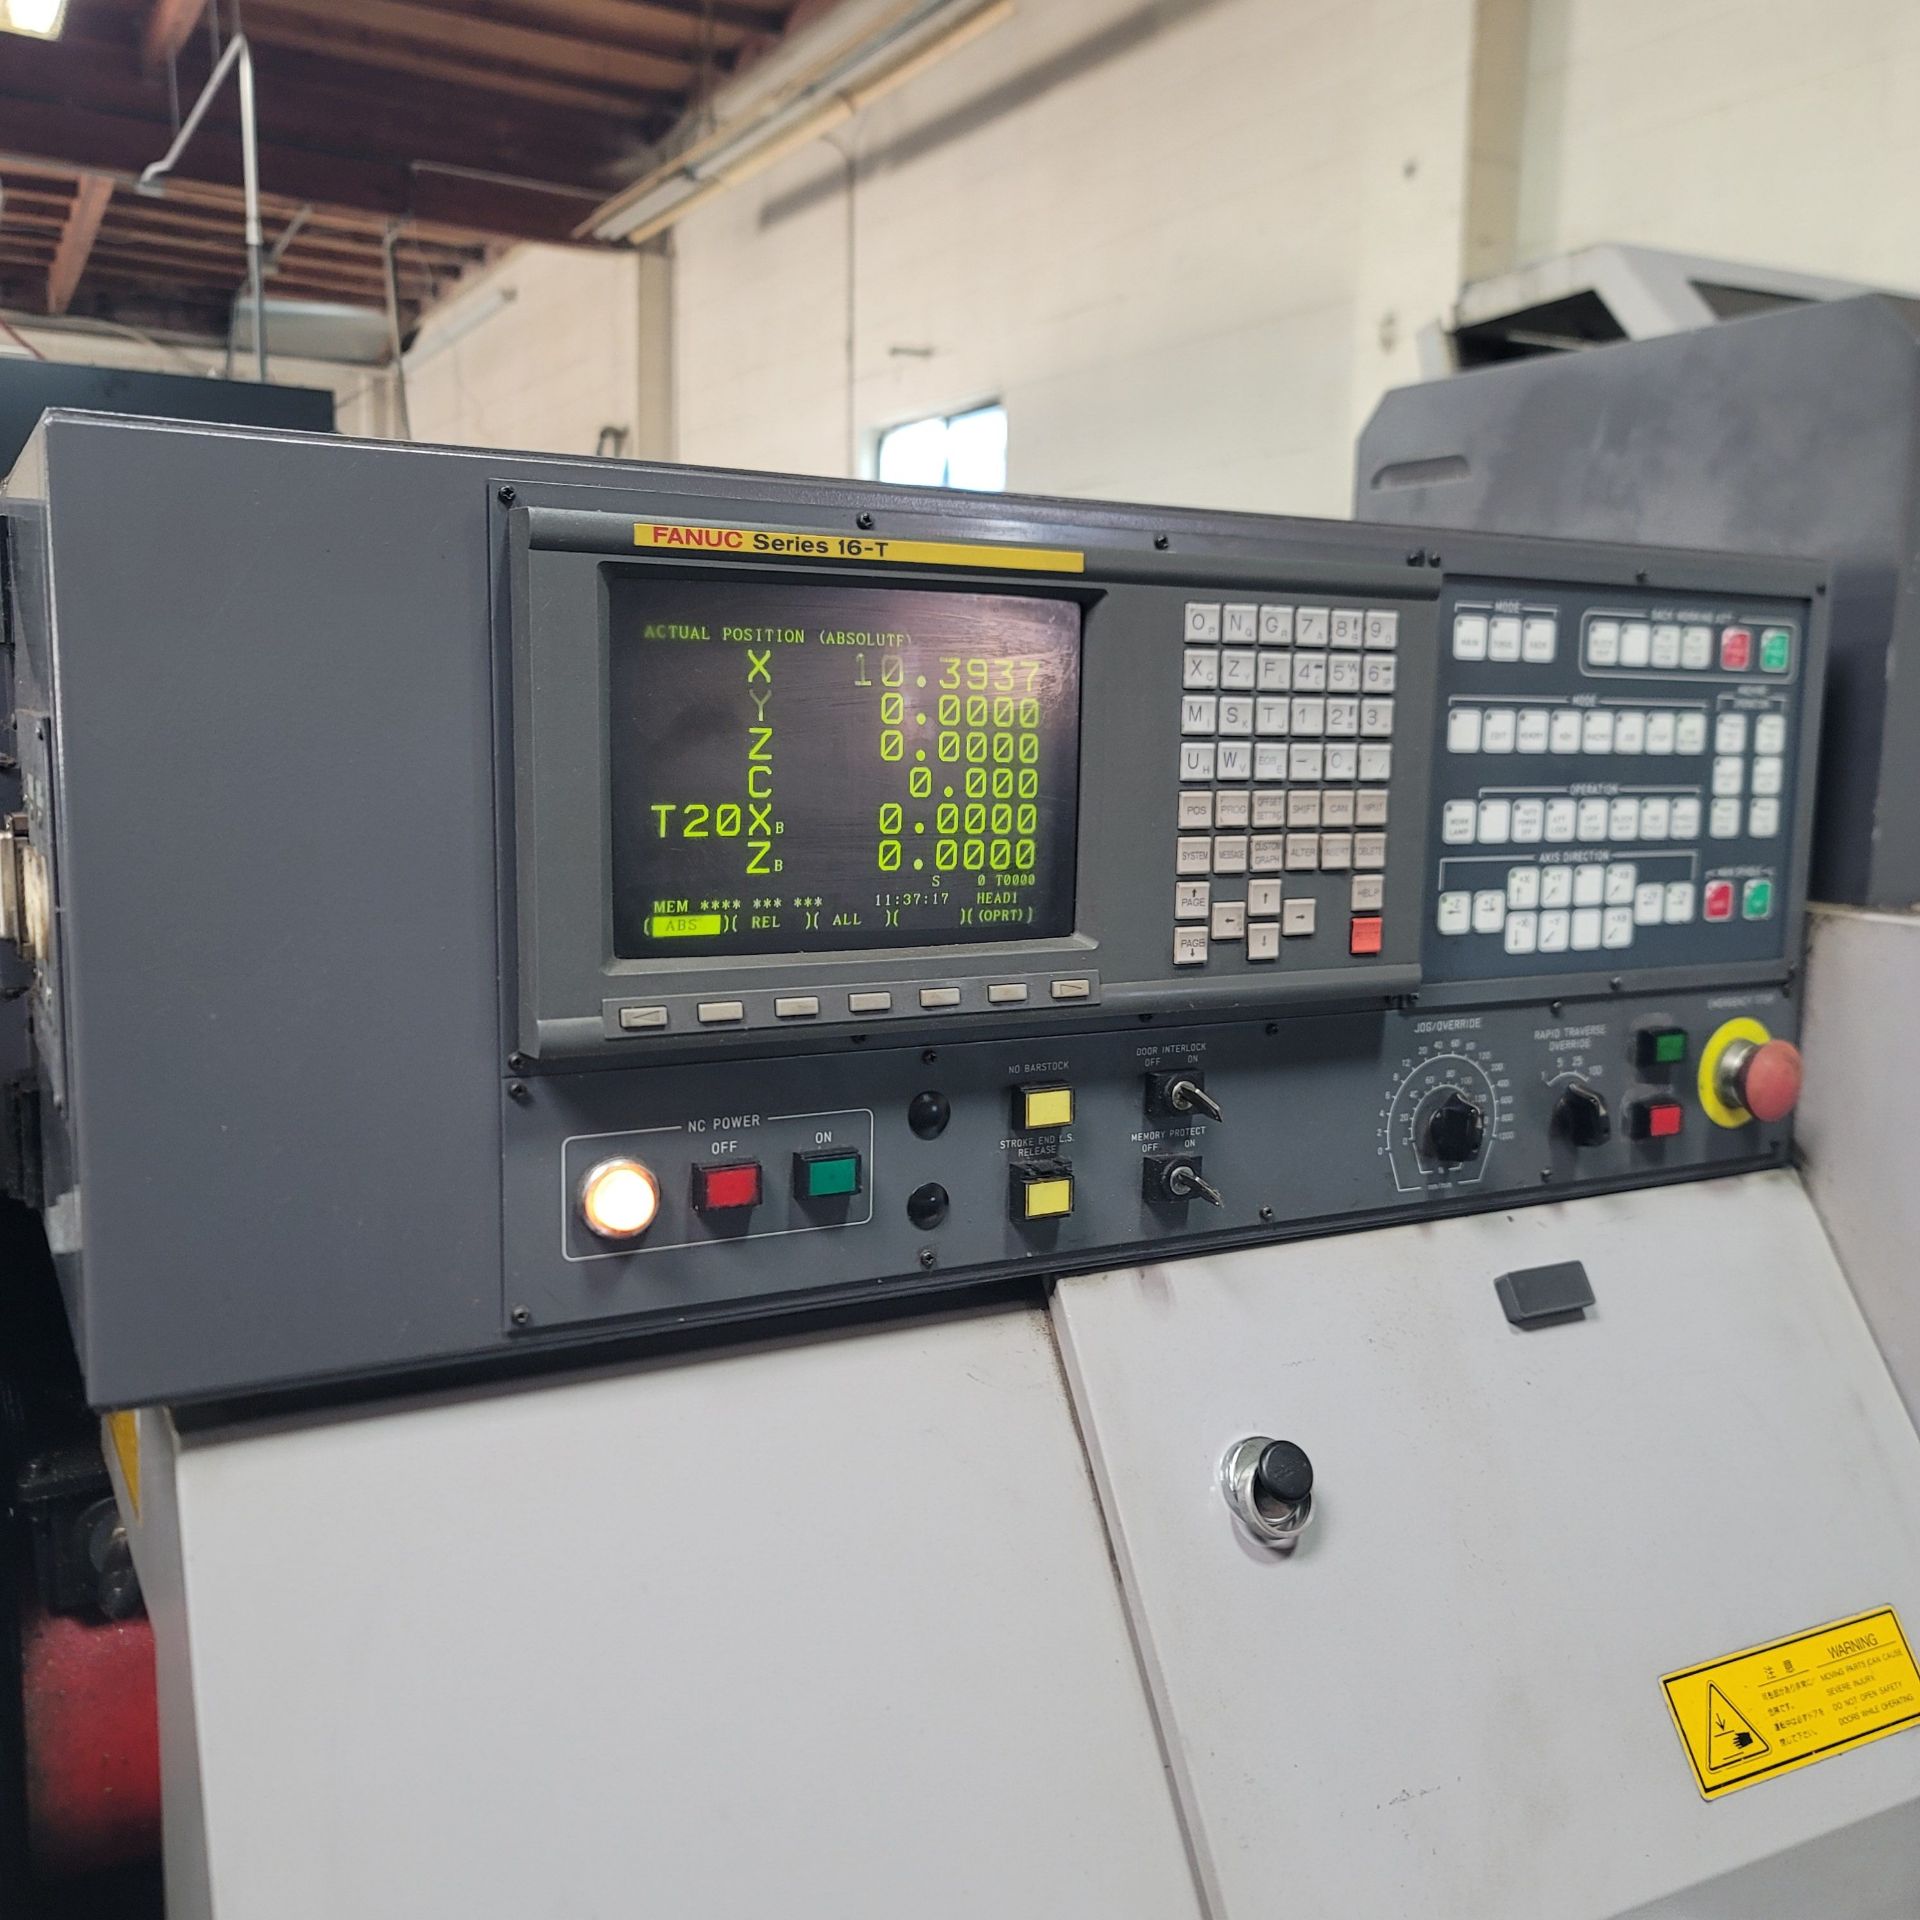 1999 STAR SR-32 SWISS LATHE, FANUC 16-T CONTROL, 32MM (1-1/4") MAIN/SUB SPINDLE, FULL C-AXIS, 7,000 - Image 5 of 23